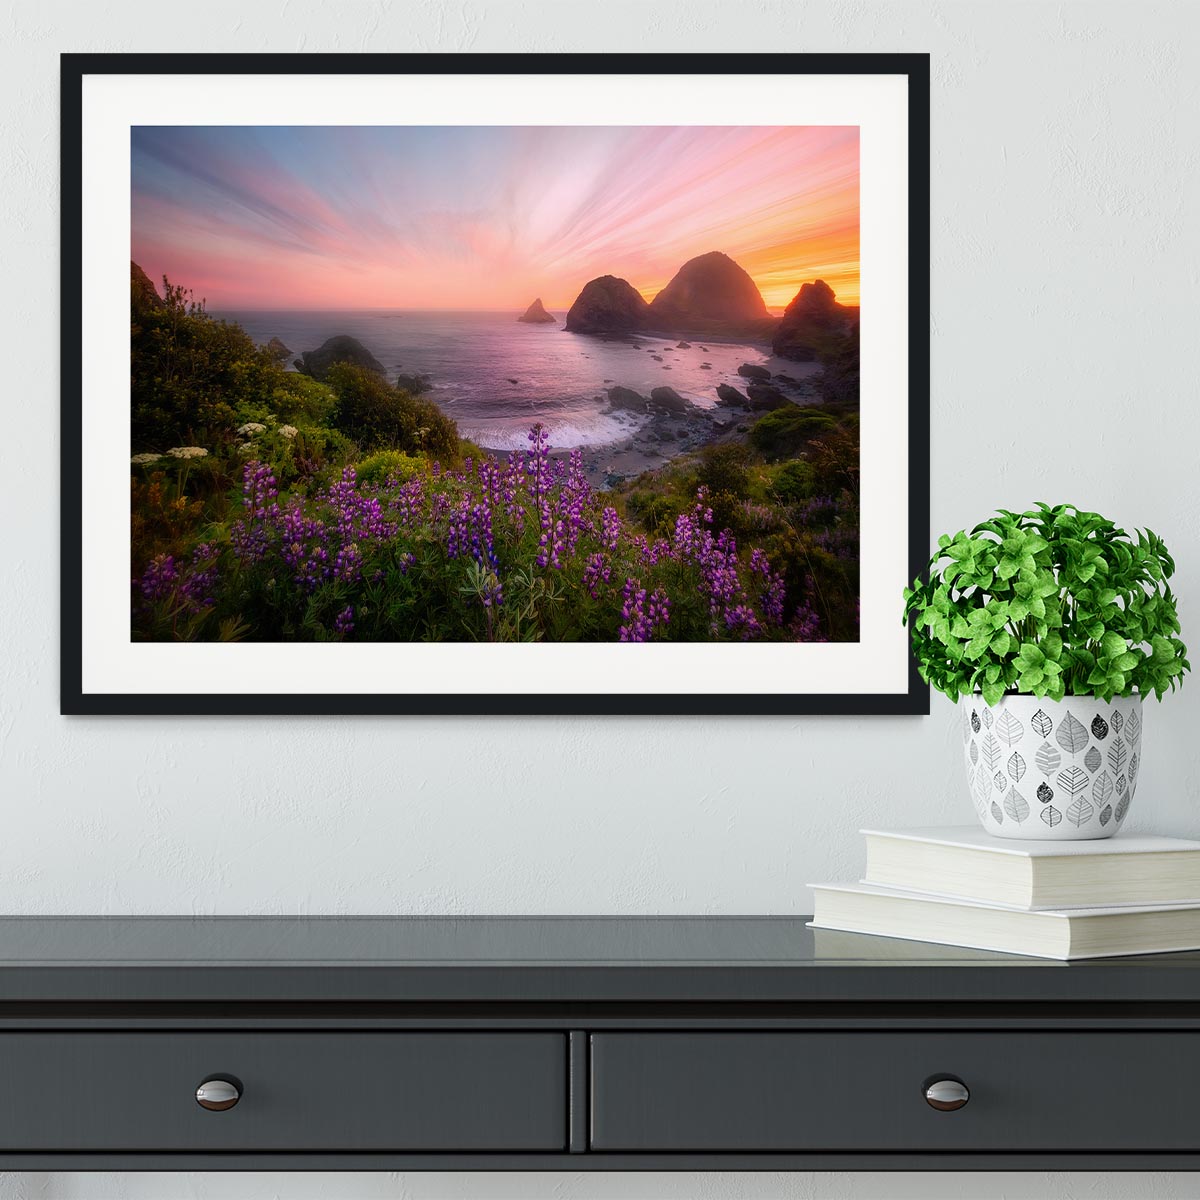 Sister Rocks with Lupin Blooms Framed Print - Canvas Art Rocks - 1